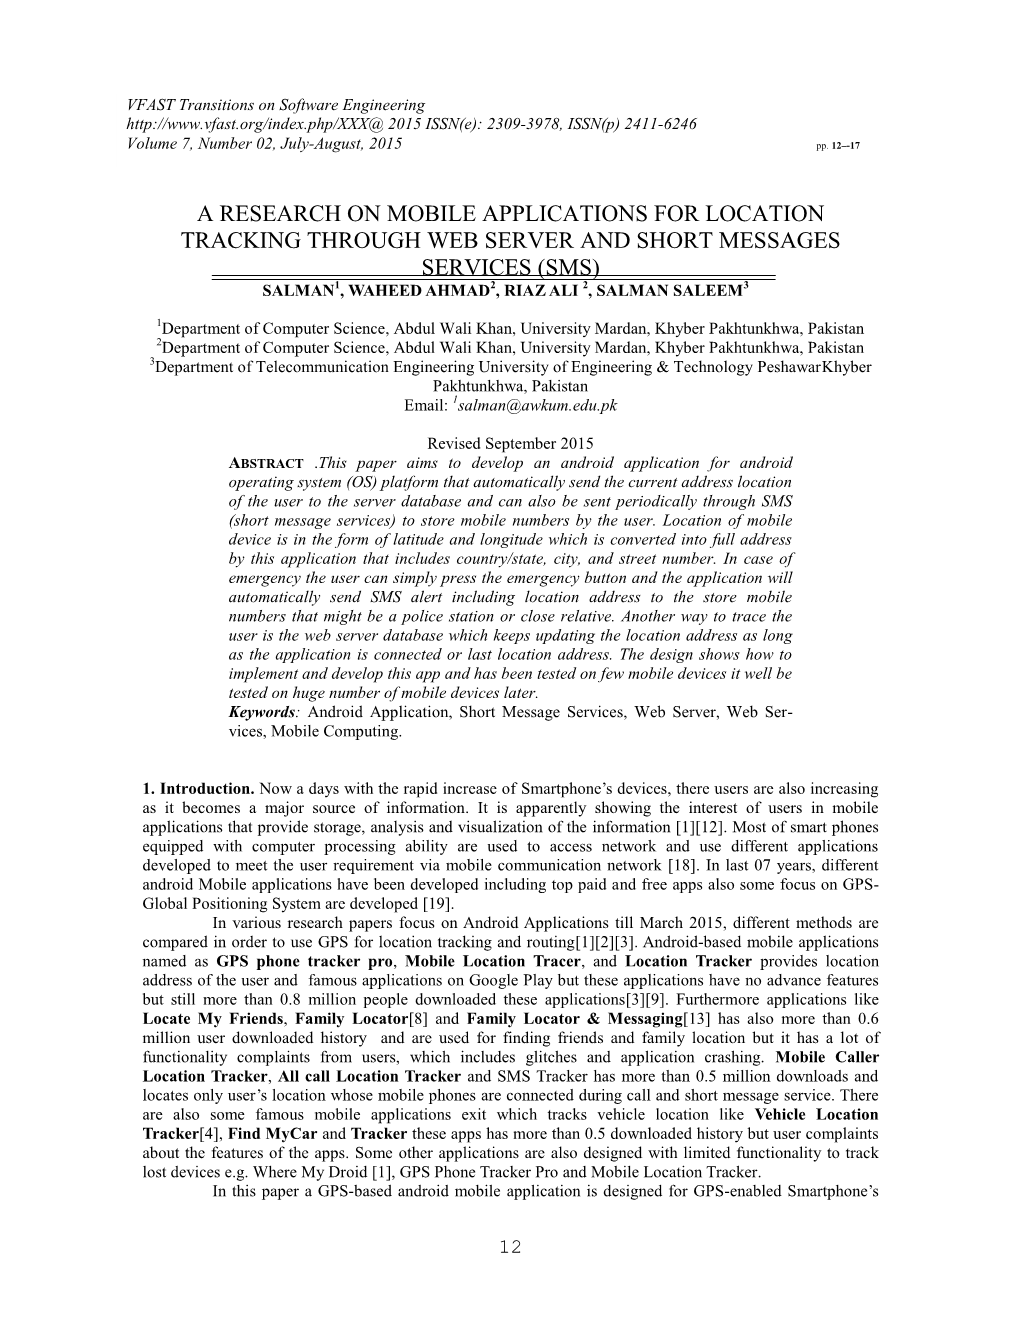 A Research on Mobile Applications for Location Tracking Through Web Server and Short Messages Services (Sms) Salman1, Waheed Ahmad2, Riaz Ali 2, Salman Saleem3